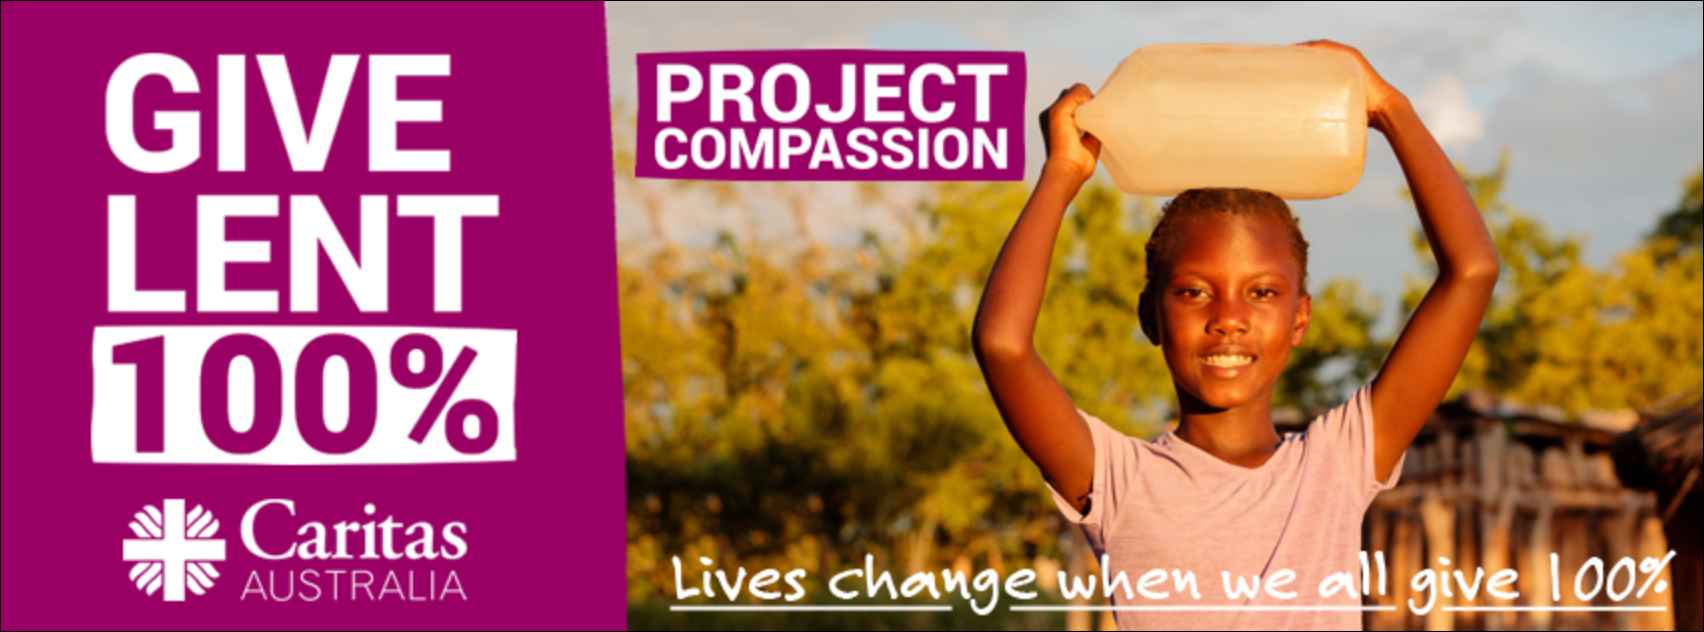 Project Compassion Launch Save the Date CEWA Stories